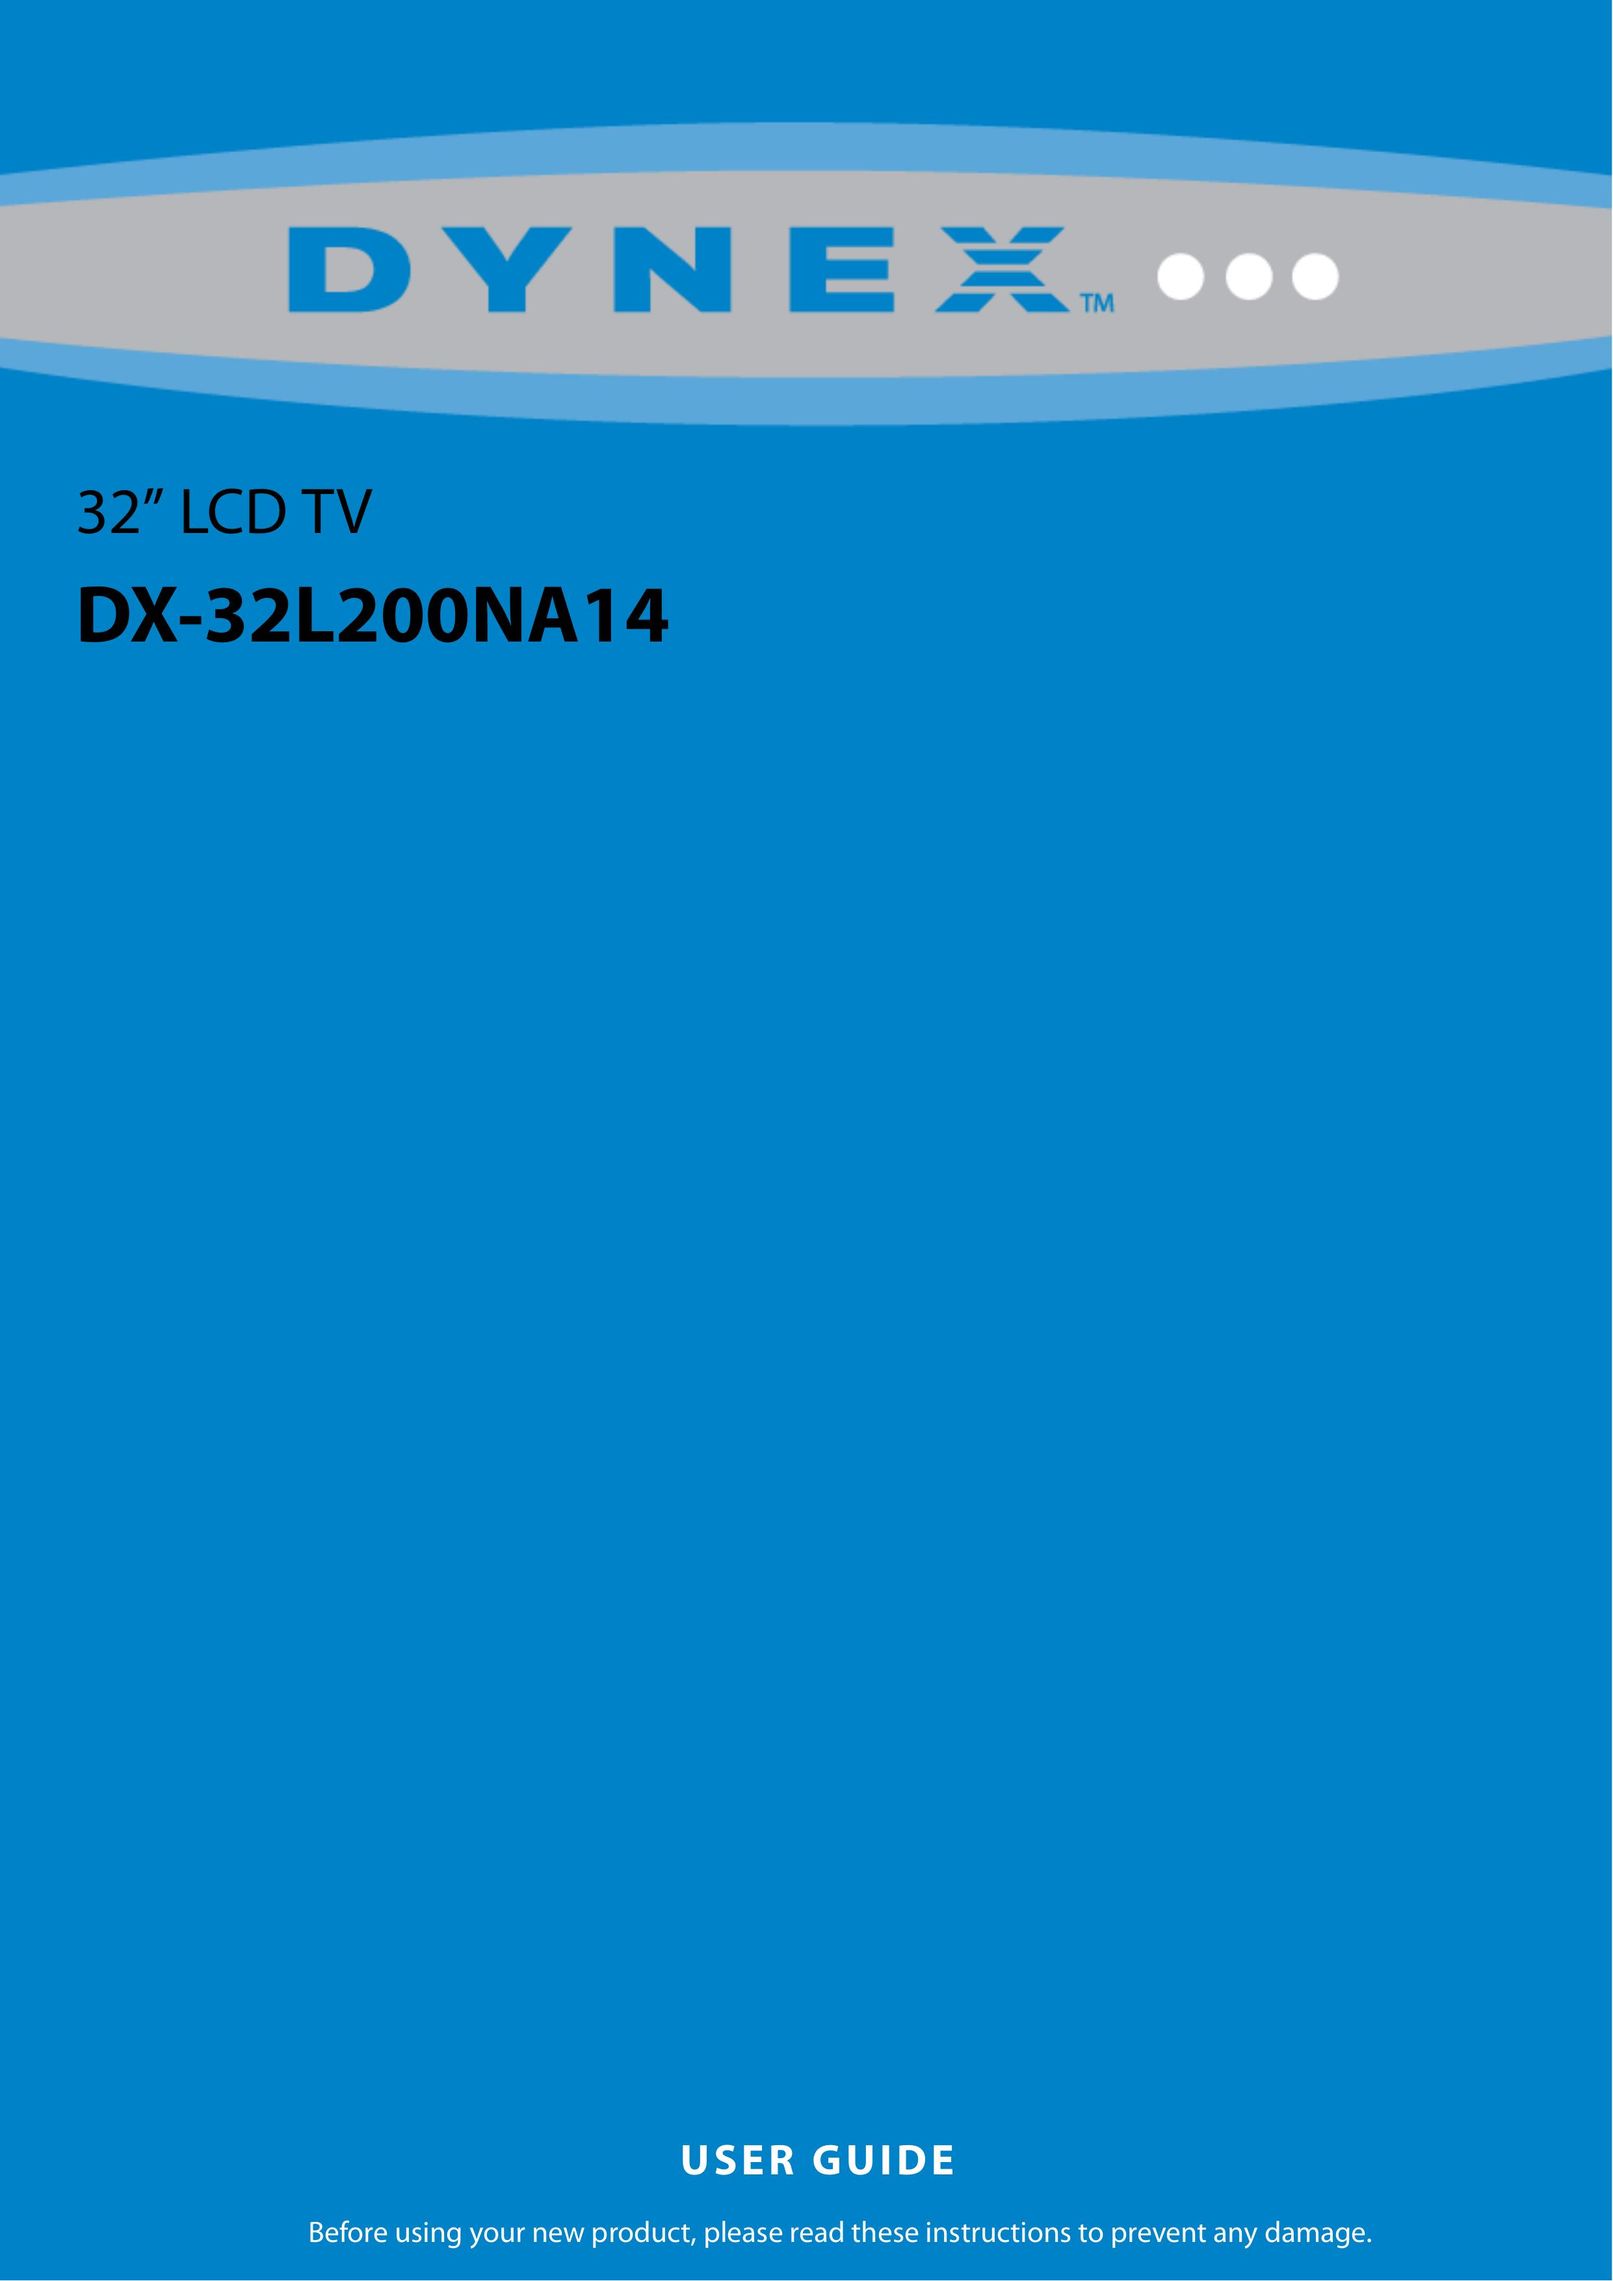 Dynex DX-32L200NA14 Flat Panel Television User Manual (Page 1)